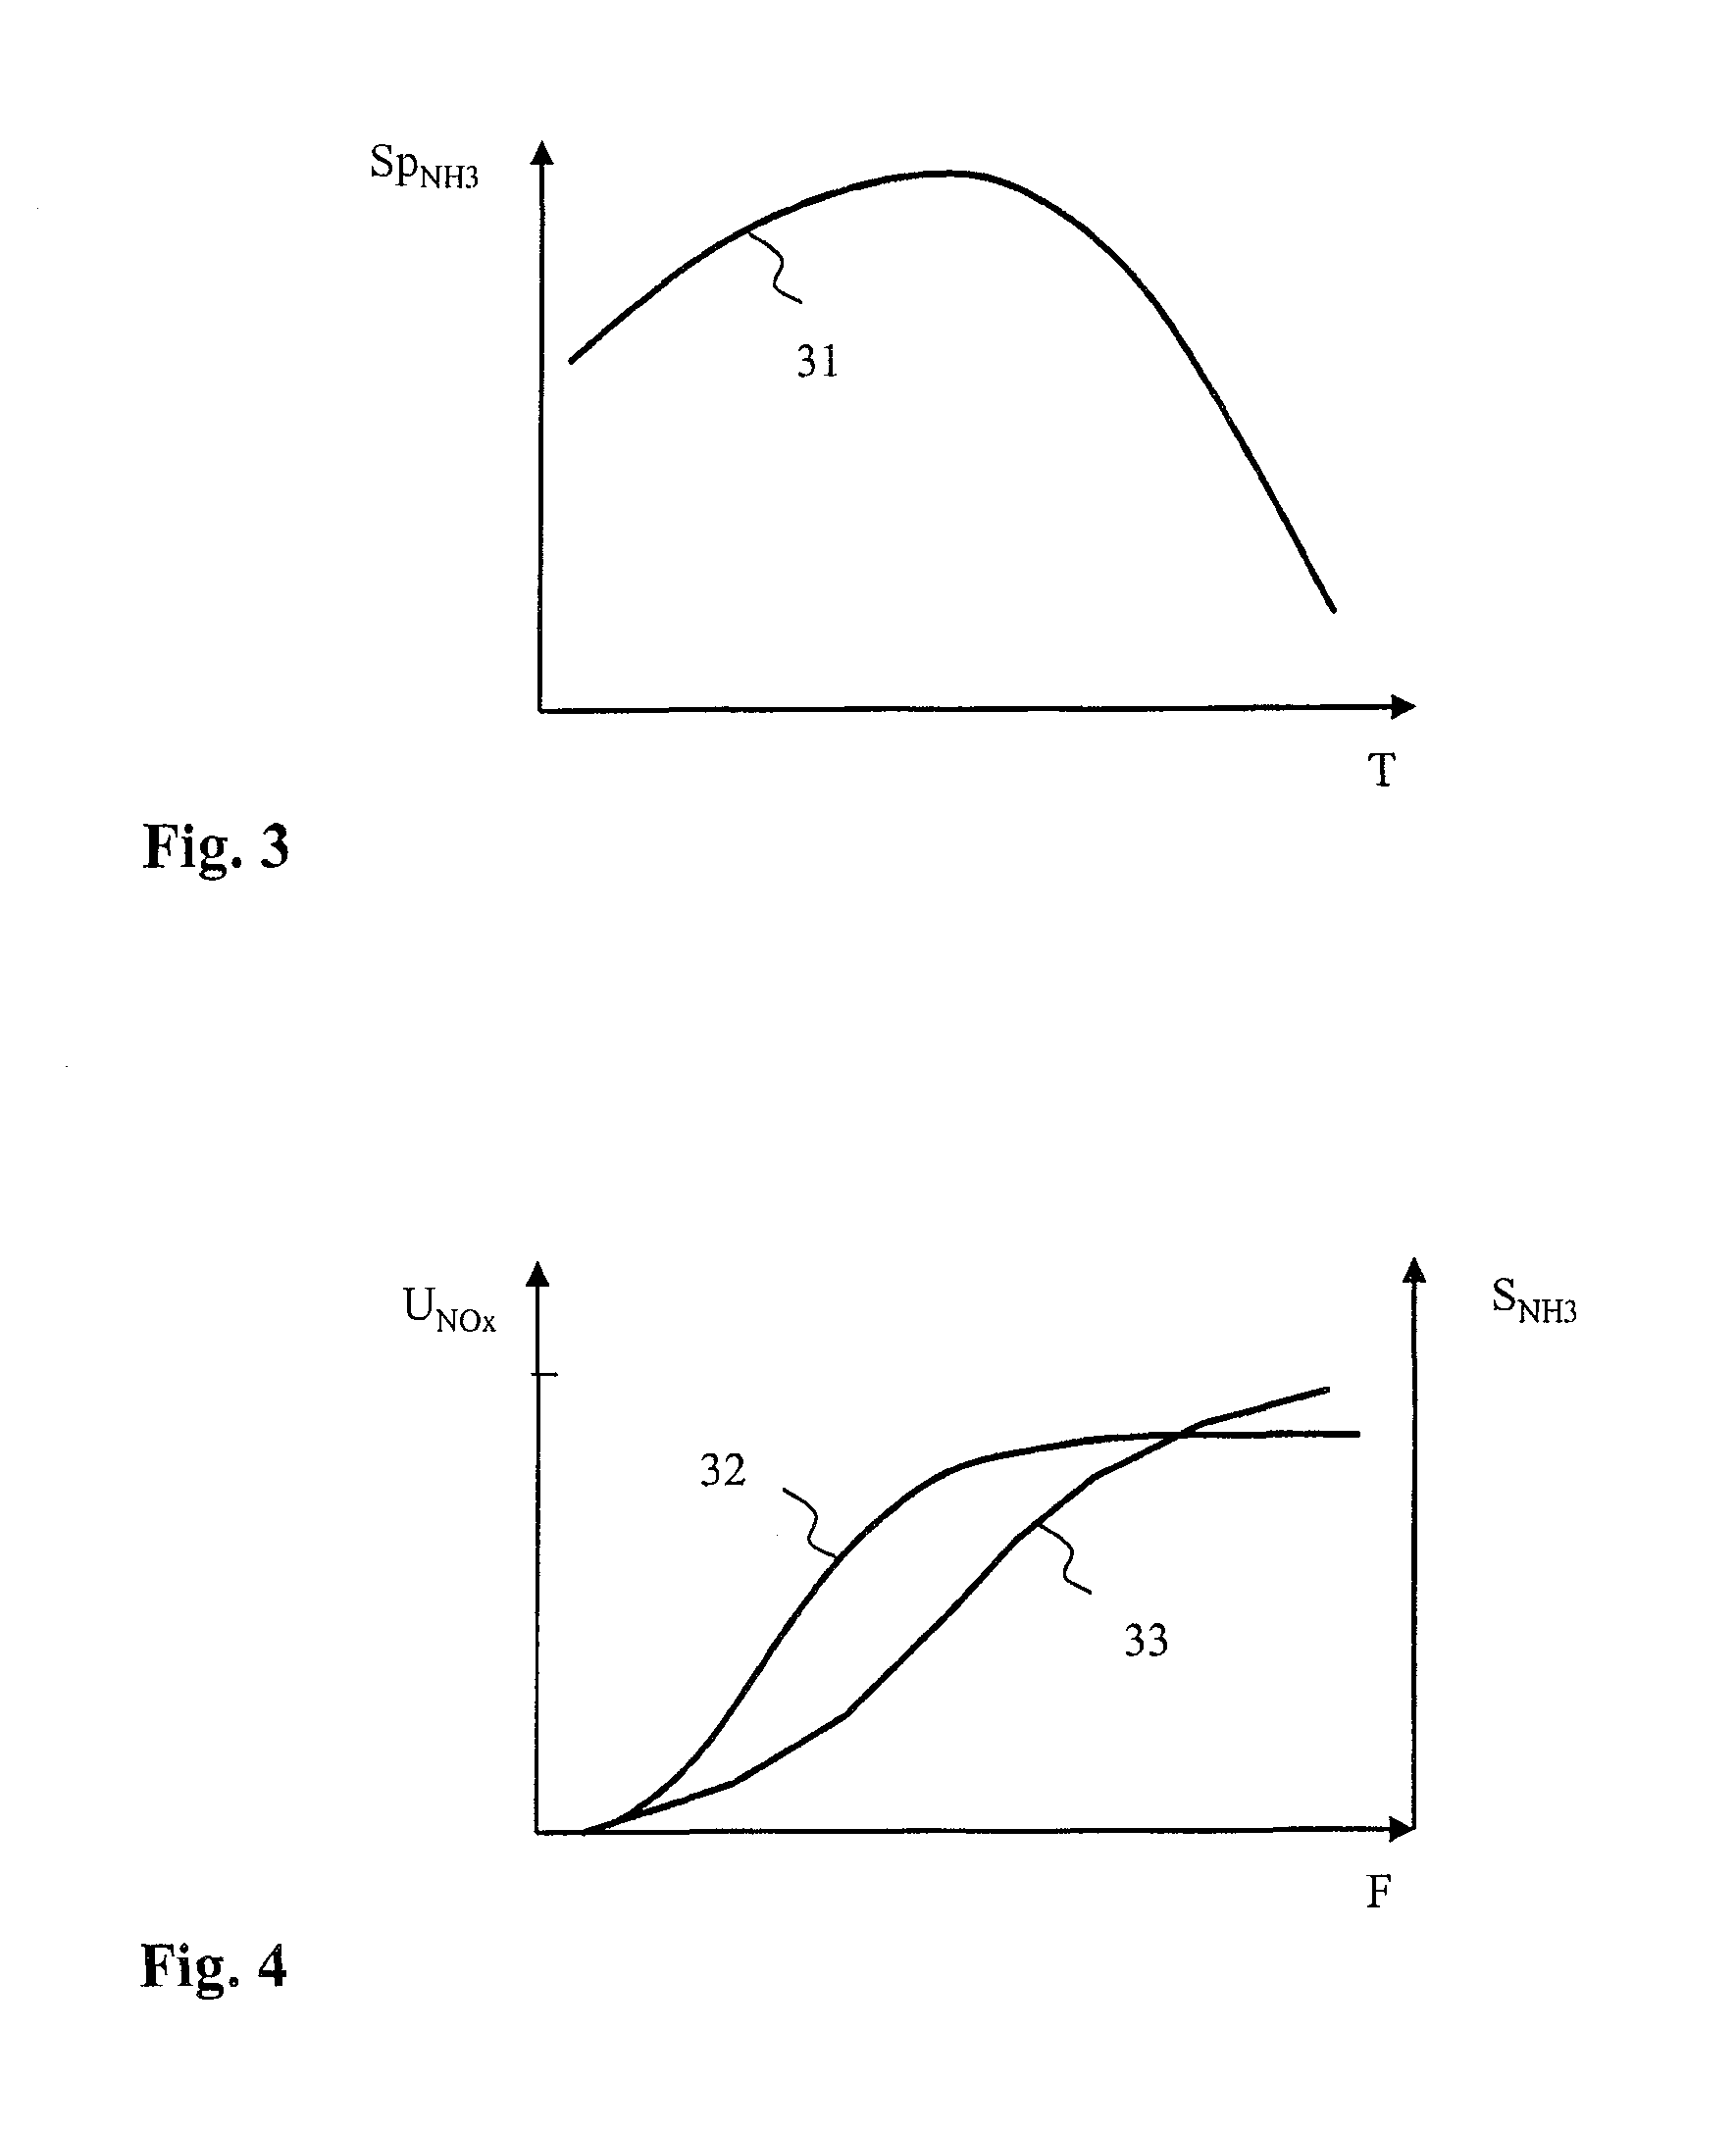 Method for Operating an Exhaust Gas Treatment System Having an SCR Catalytic Converter